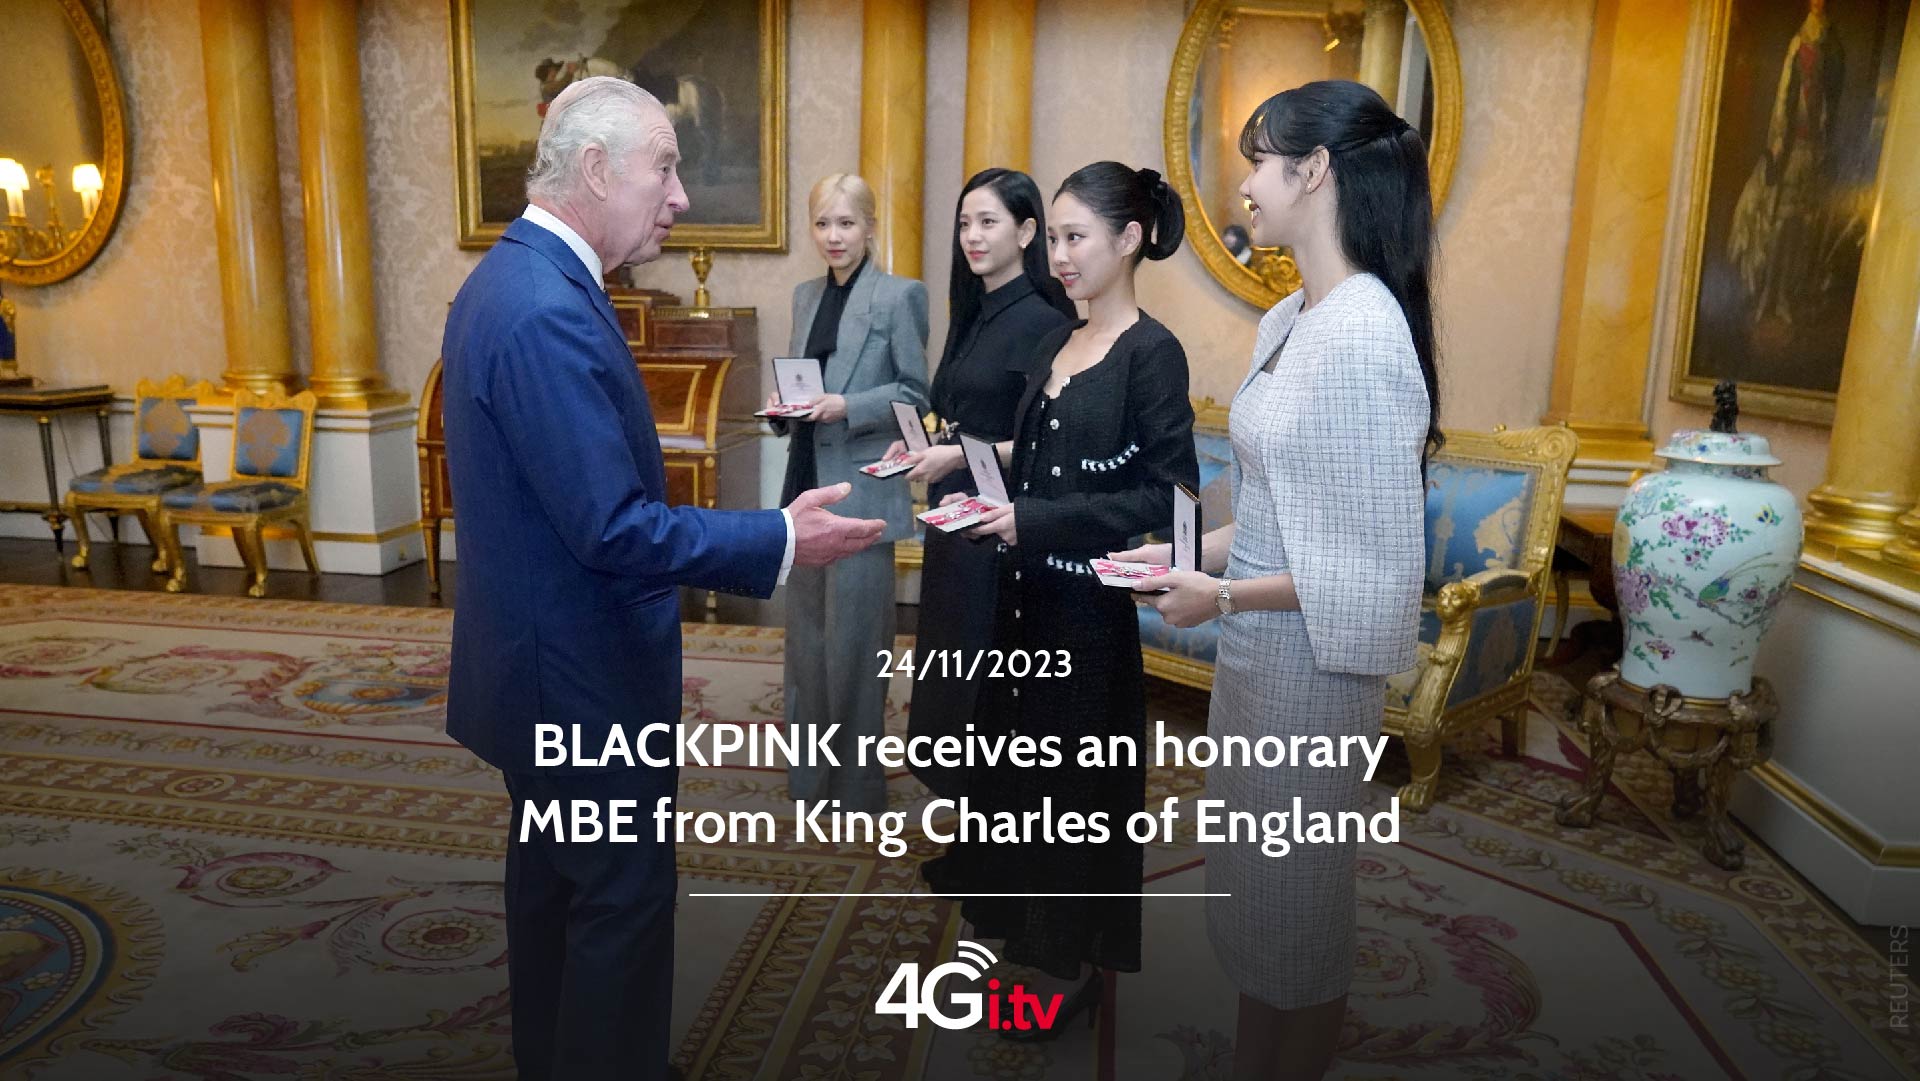 Подробнее о статье BLACKPINK receives an honorary MBE from King Charles of England